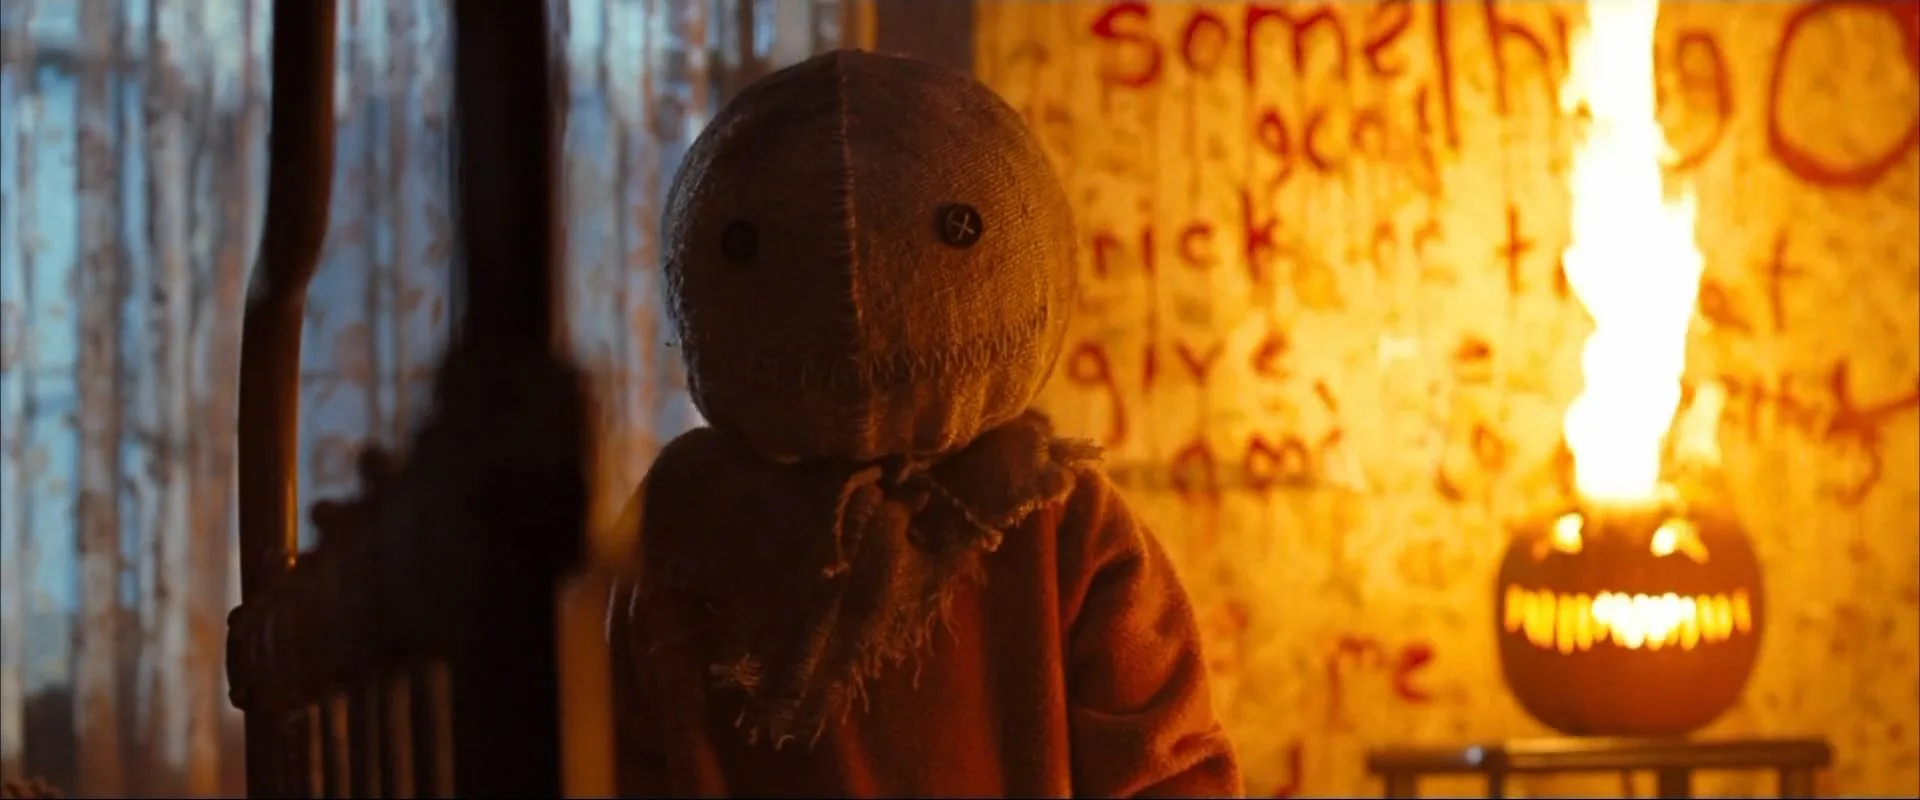 Trick 'r Treat (2007) Horror Movie Review